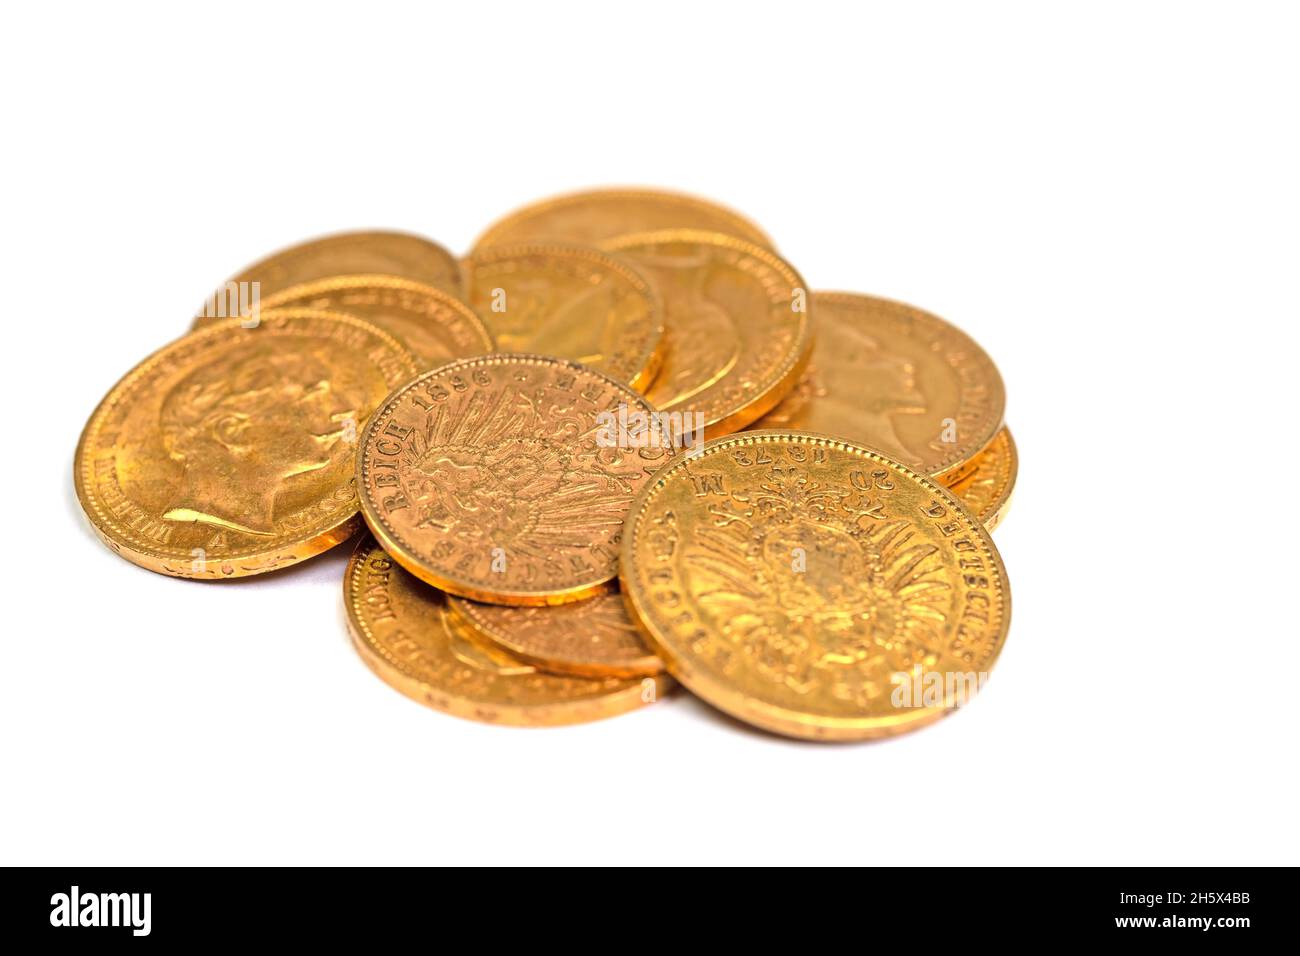 Old gold coins against white background Stock Photo